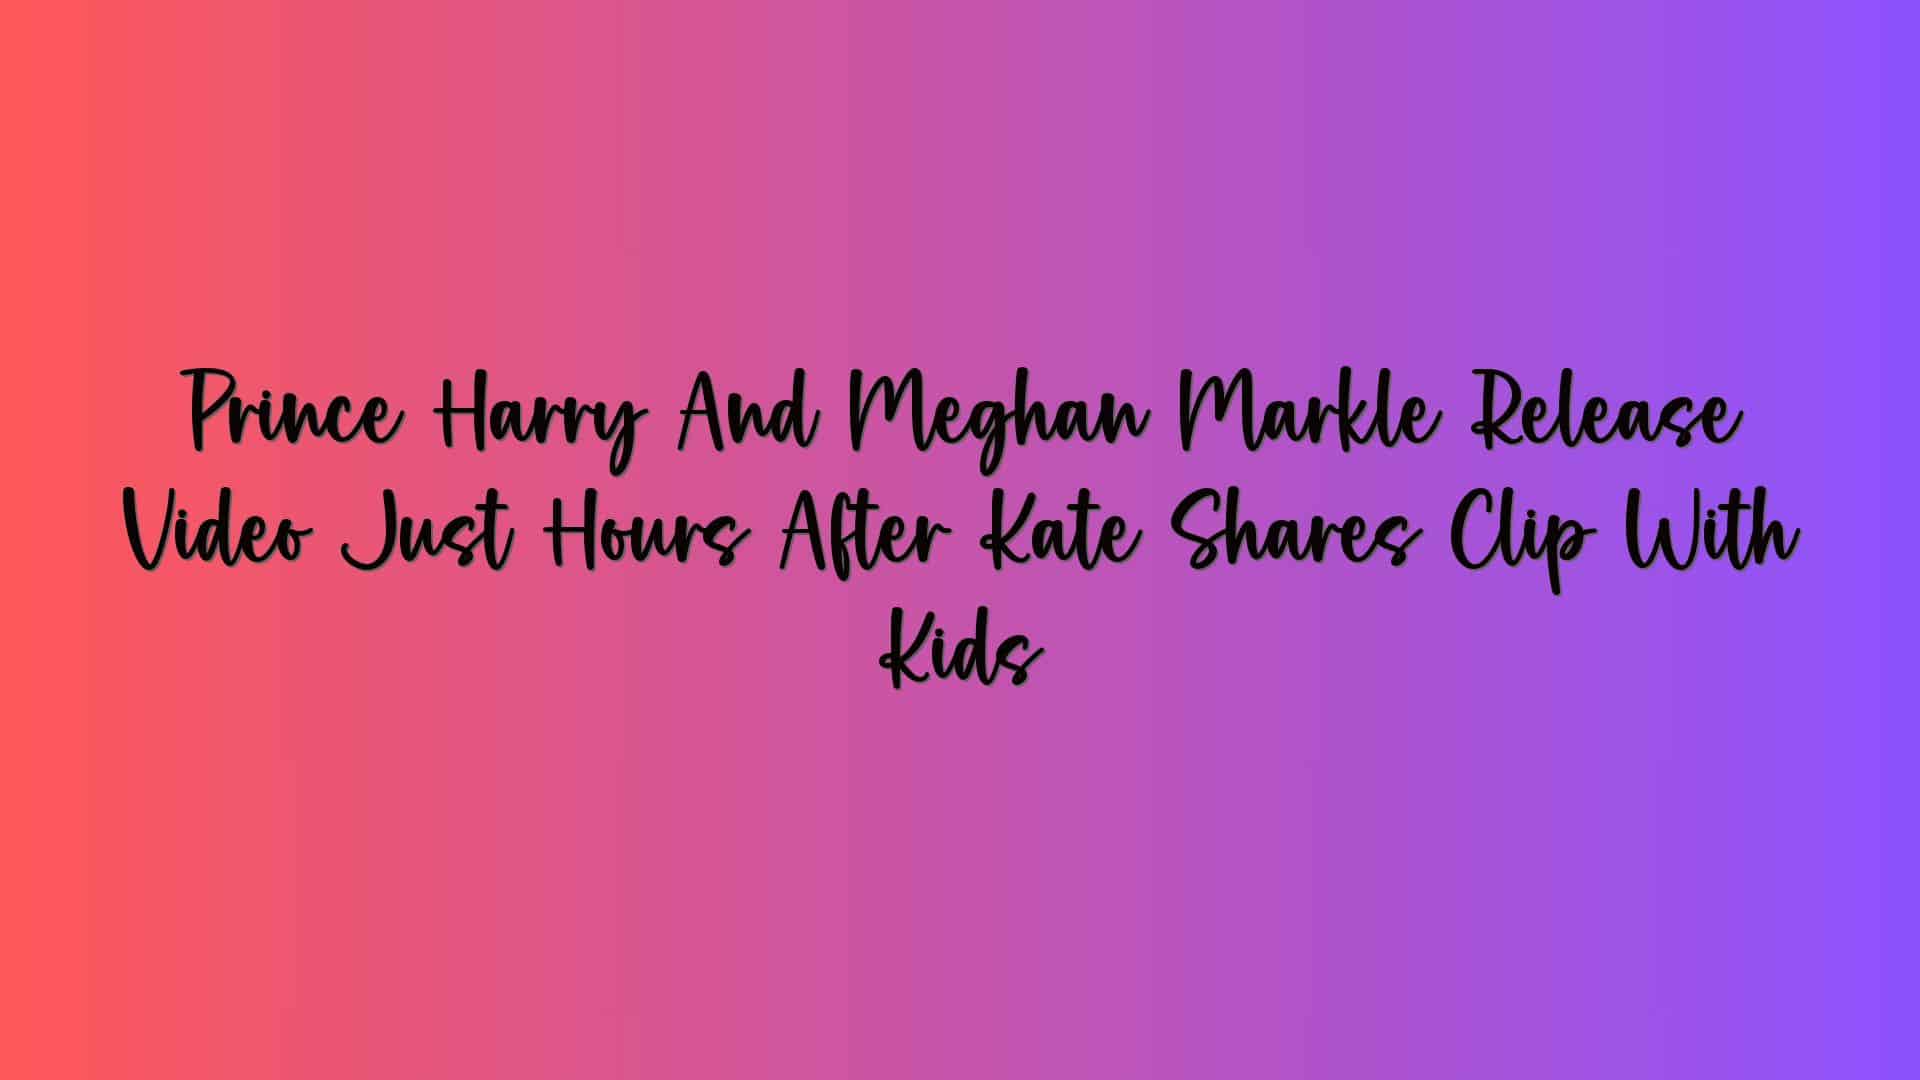 Prince Harry And Meghan Markle Release Video Just Hours After Kate Shares Clip With Kids